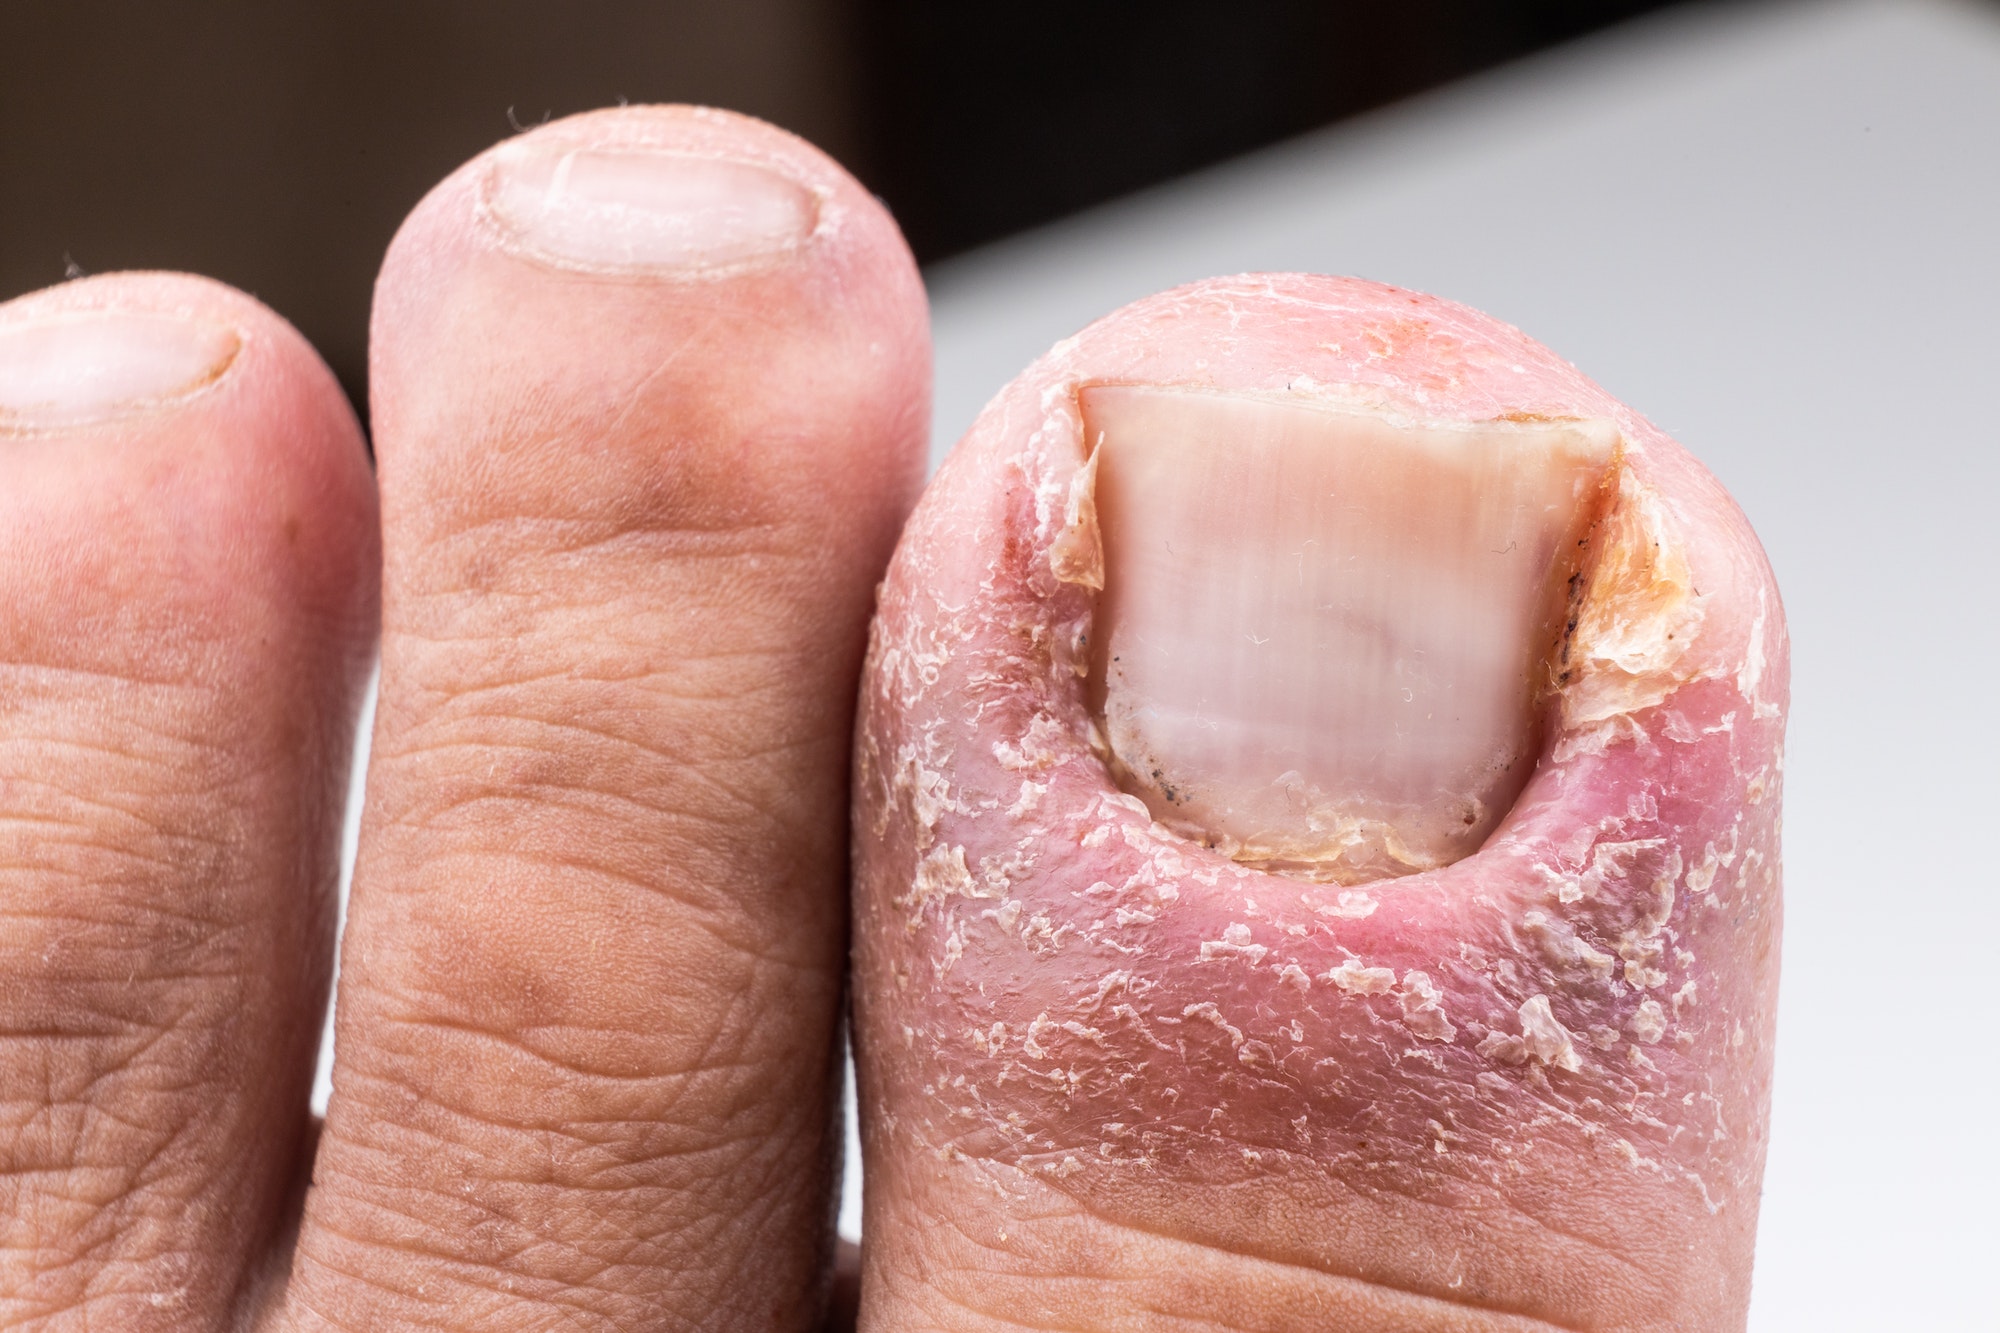 Closeup of painful inflammed infection of the big toe due to ingrown toenail